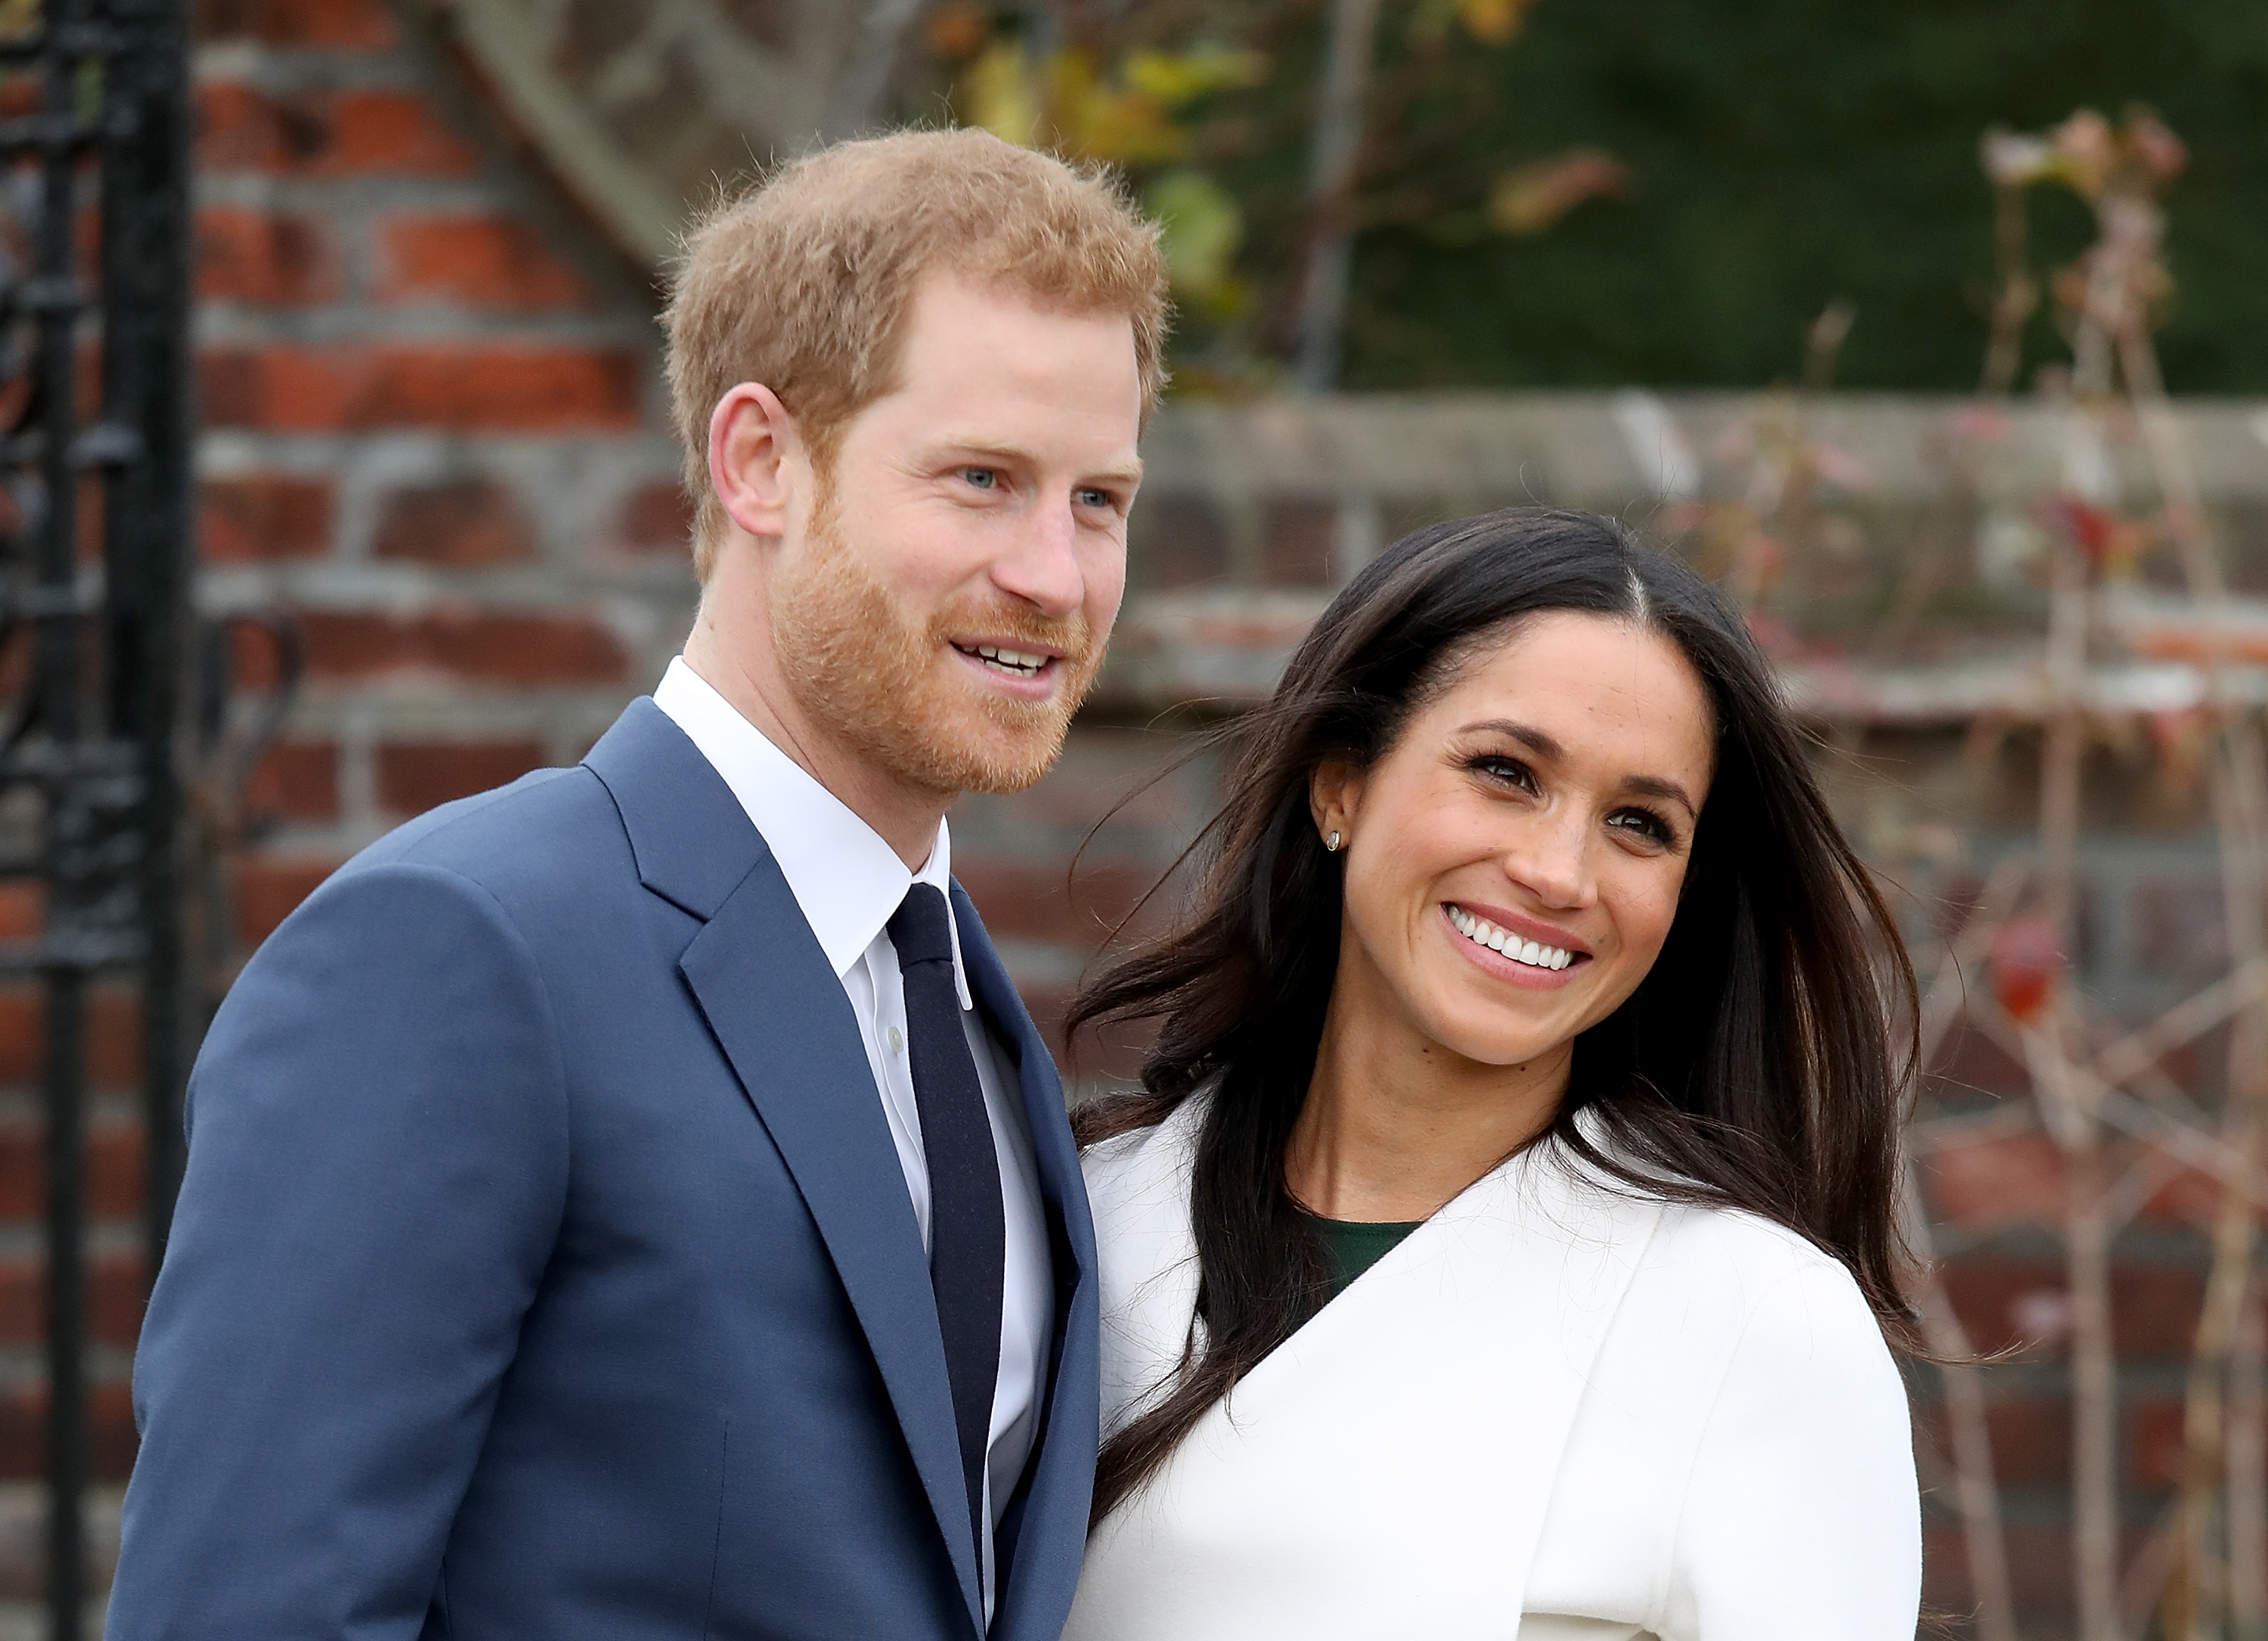 Prince Harry and Meghan Markle during an official photocall to announce their engagement at The Sunken Gardens at Kensington Palace on November 27, 2017, in London, England. | Source: Getty Images